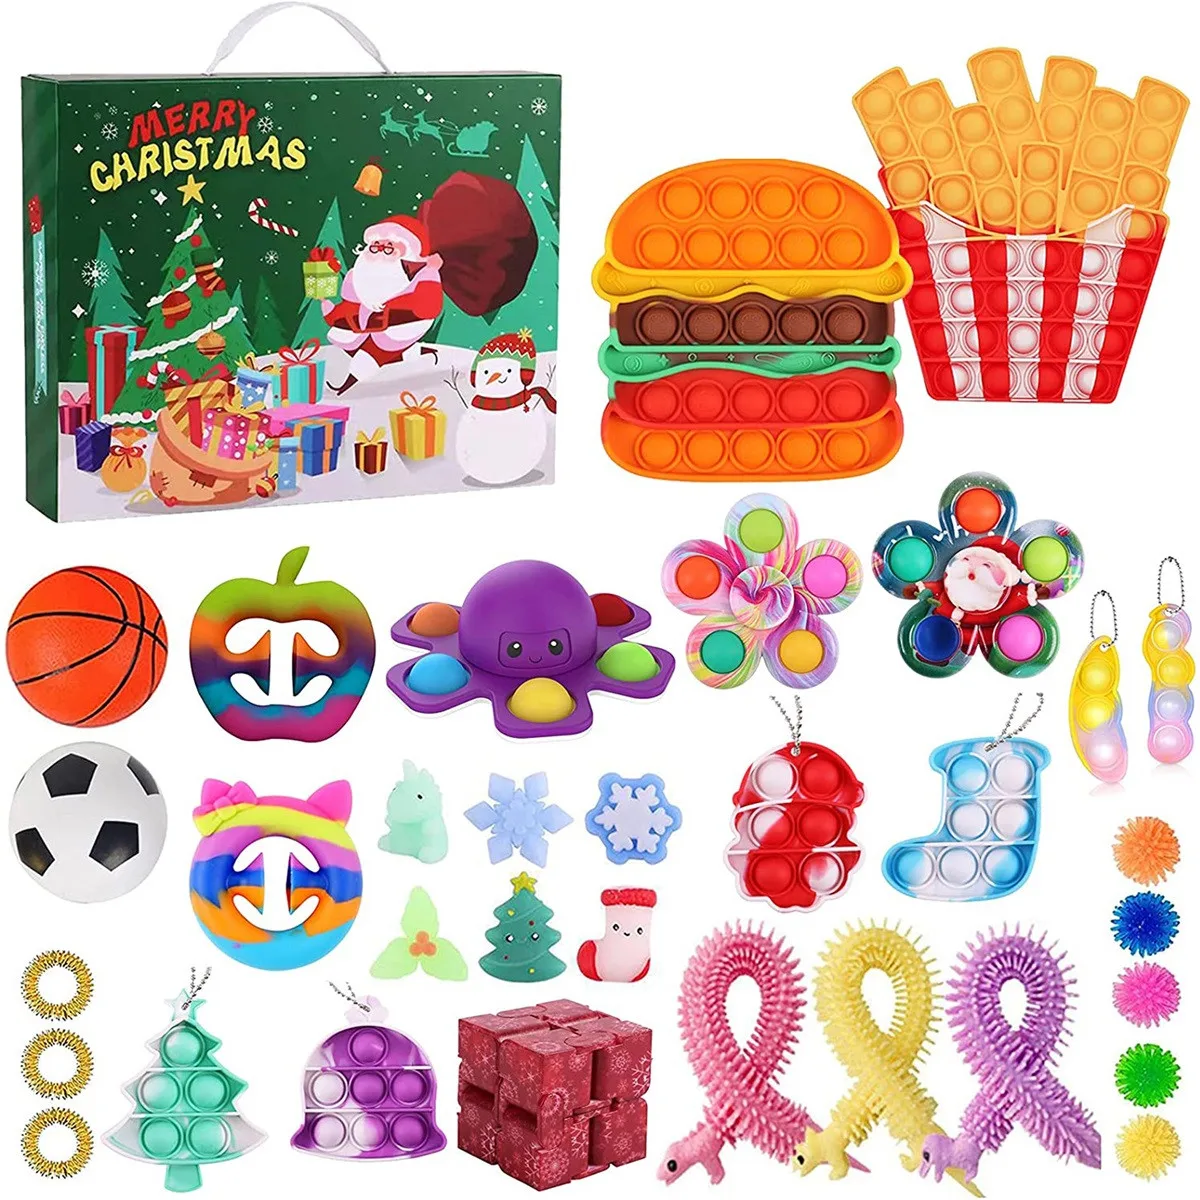 Circle,Seals 2021 Christmas 24 Days Advent Calendar,Holiday Countdown Calendar with 35 pcs Sensory Fidget Pack Like Squishies,Rings Spring Coils Silicone Doll in 24 Windows Surprise Toys for Kids Party Favors,Christmas Miniatures 